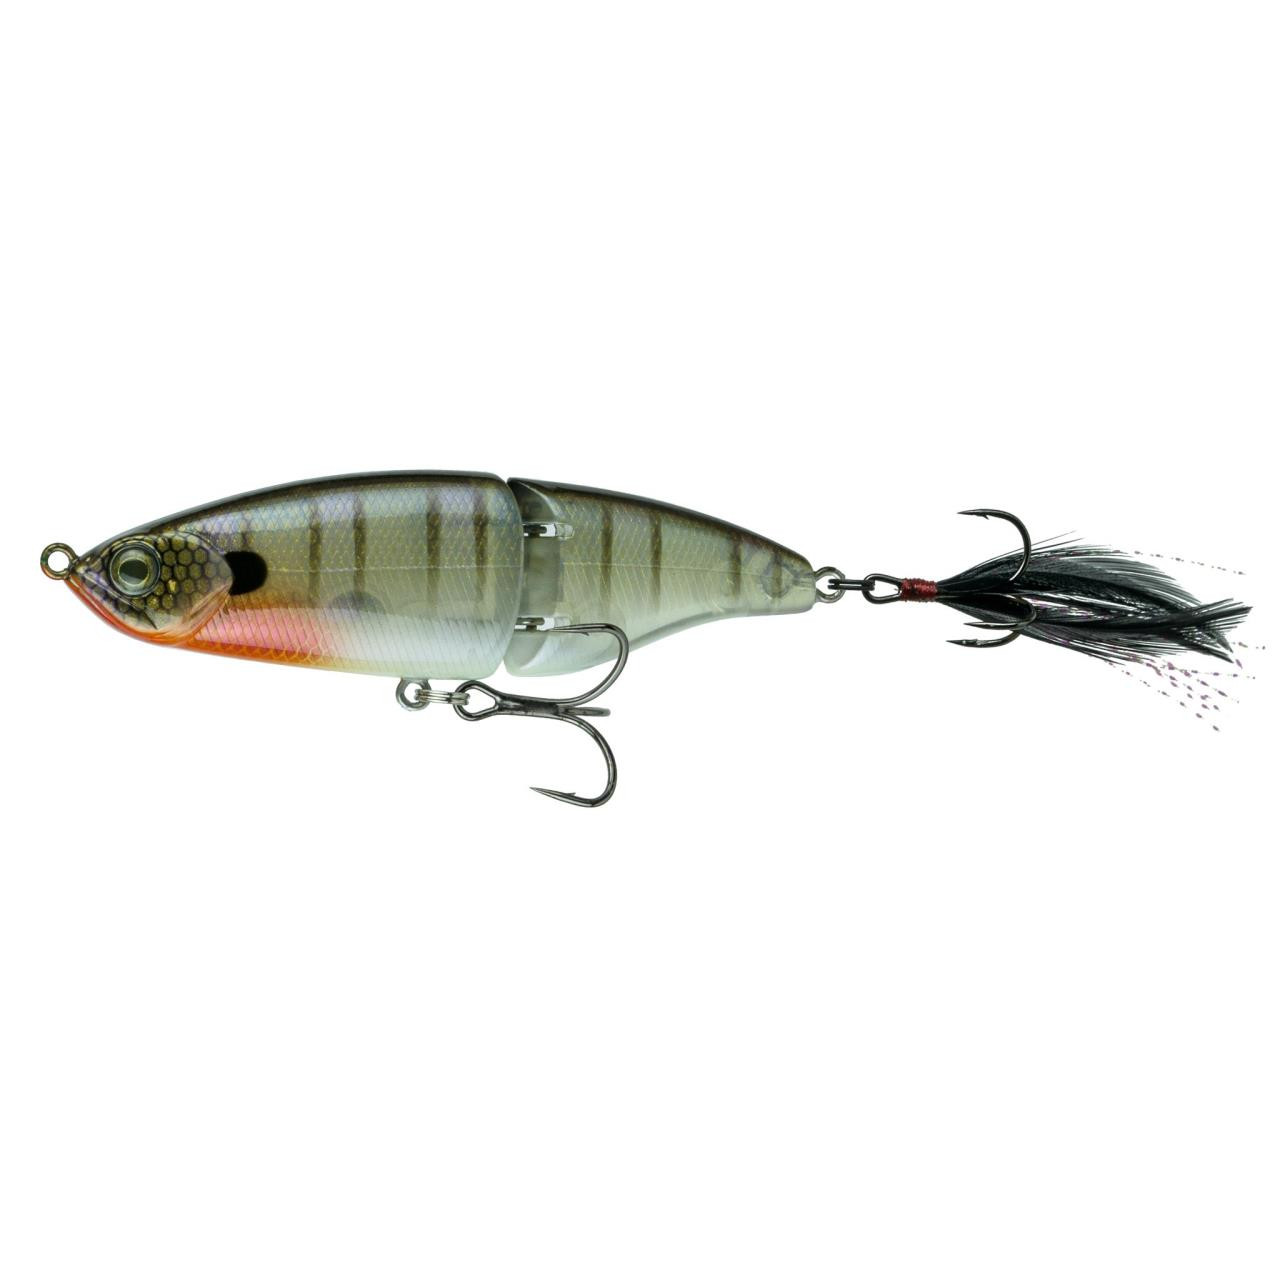 https://cdn11.bigcommerce.com/s-70mih4s/images/stencil/1280x1280/products/16357/60844/6th-Sense-Speed-Glide-100-Swimbait-810047028543_image2__20834.1675980746.jpg?c=2